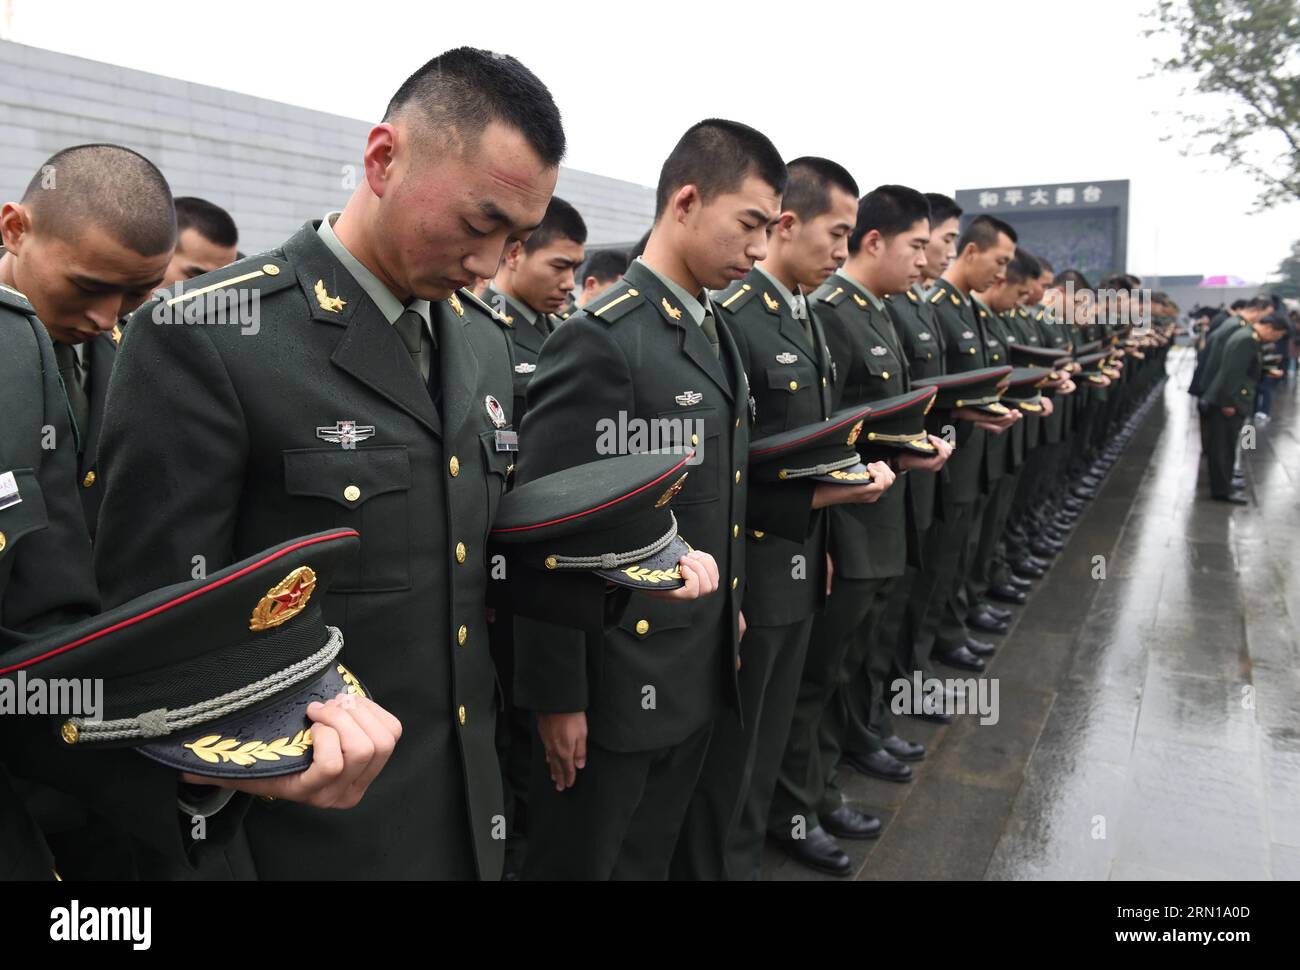 (141210) -- NANJING, Dec. 10, 2014 -- Soldiers of the People s Liberation Army (PLA) mourn during a memorial ceremony at the Memorial Hall of the Victims in Nanjing Massacre by Japanese Invaders, in Nanjing, Dec. 10, 2014.) (mp) CHINA-NANJING-MASSACRE-MEMORIAL CEREMONY(CN) SunxCan PUBLICATIONxNOTxINxCHN   Nanjing DEC 10 2014 Soldiers of The Celebrities S Liberation Army PLA Morne during a Memorial Ceremony AT The Memorial Hall of The Victims in Nanjing Massacre by Japanese Invaders in Nanjing DEC 10 2014 MP China Nanjing Massacre Memorial Ceremony CN  PUBLICATIONxNOTxINxCHN Stock Photo